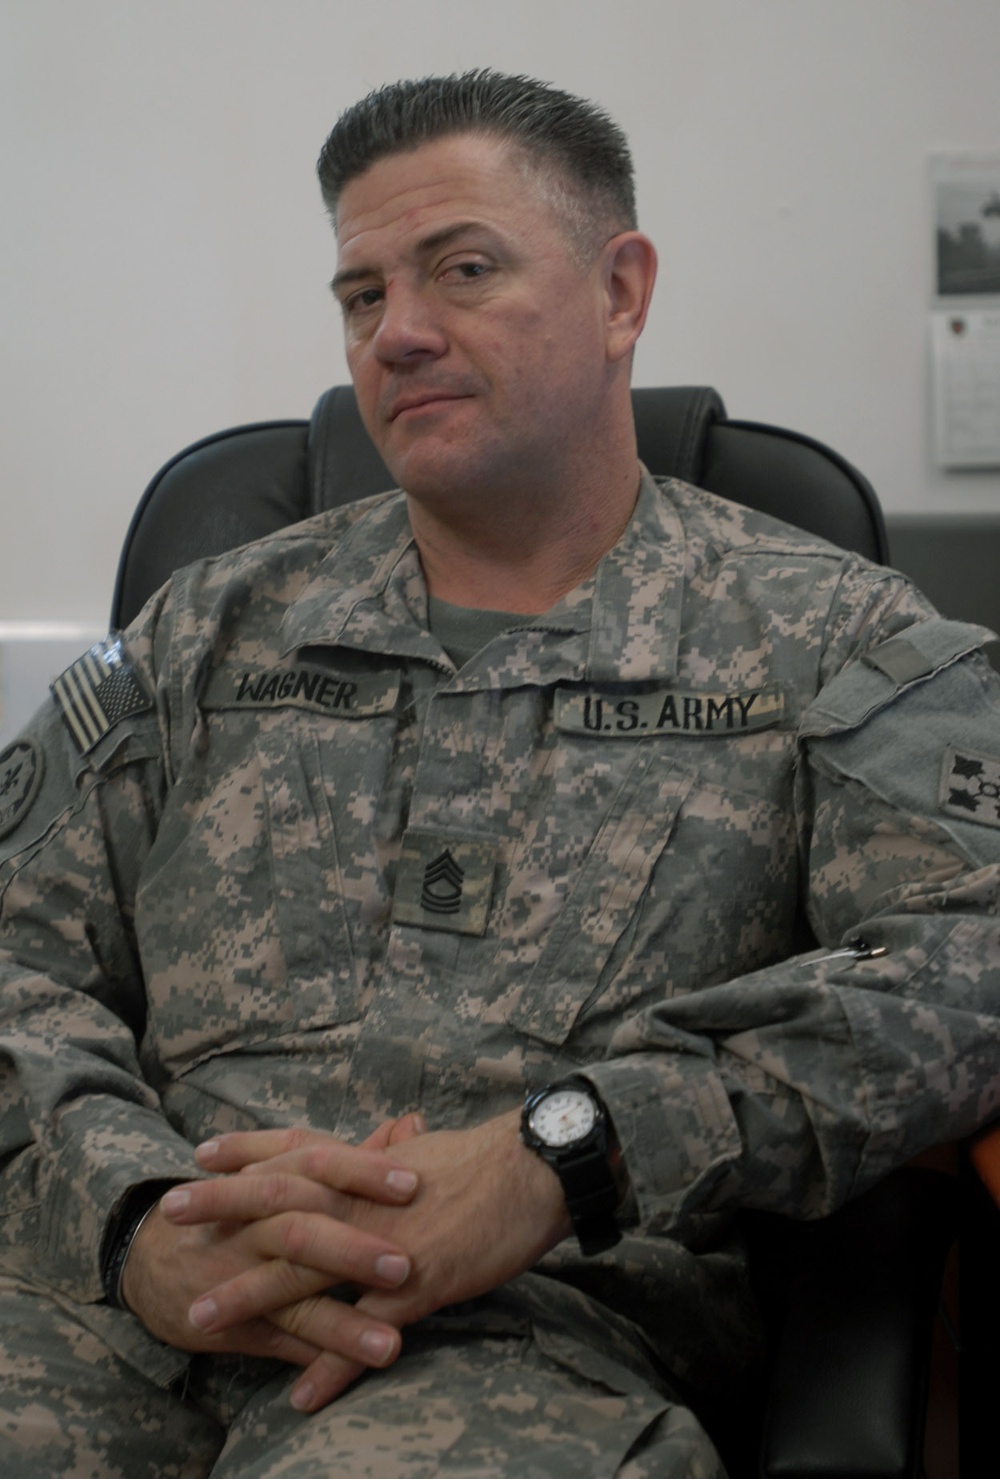 Master Sergeant comes full circle with latest deployment to Iraq